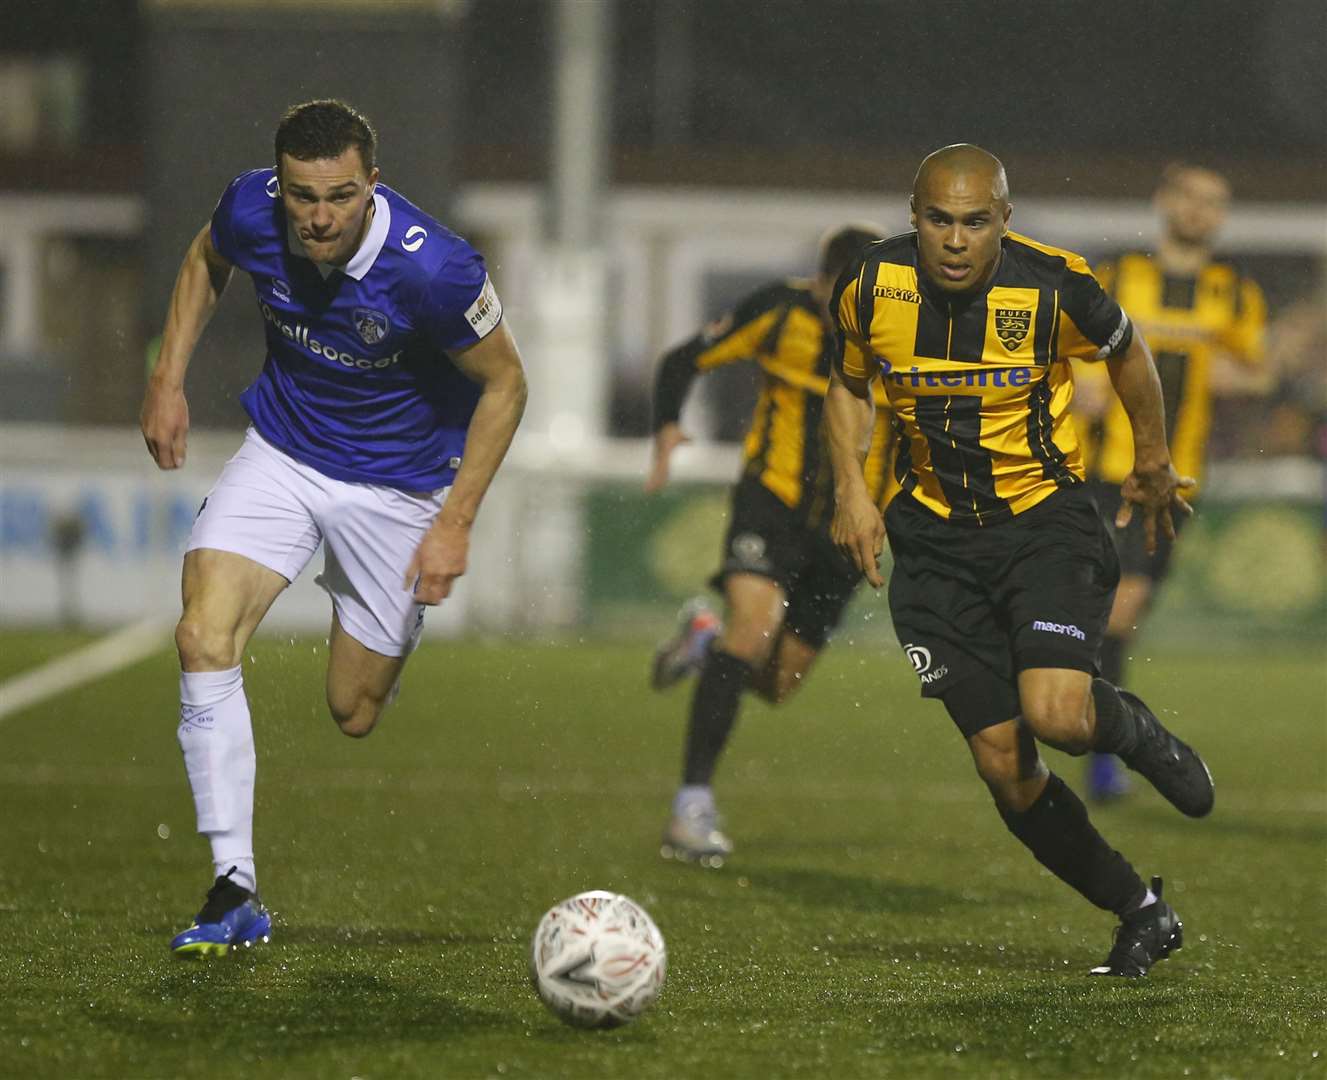 Maidstone reached the FA Cup second round last season, losing to League 2 Oldham Picture: Andy Jones